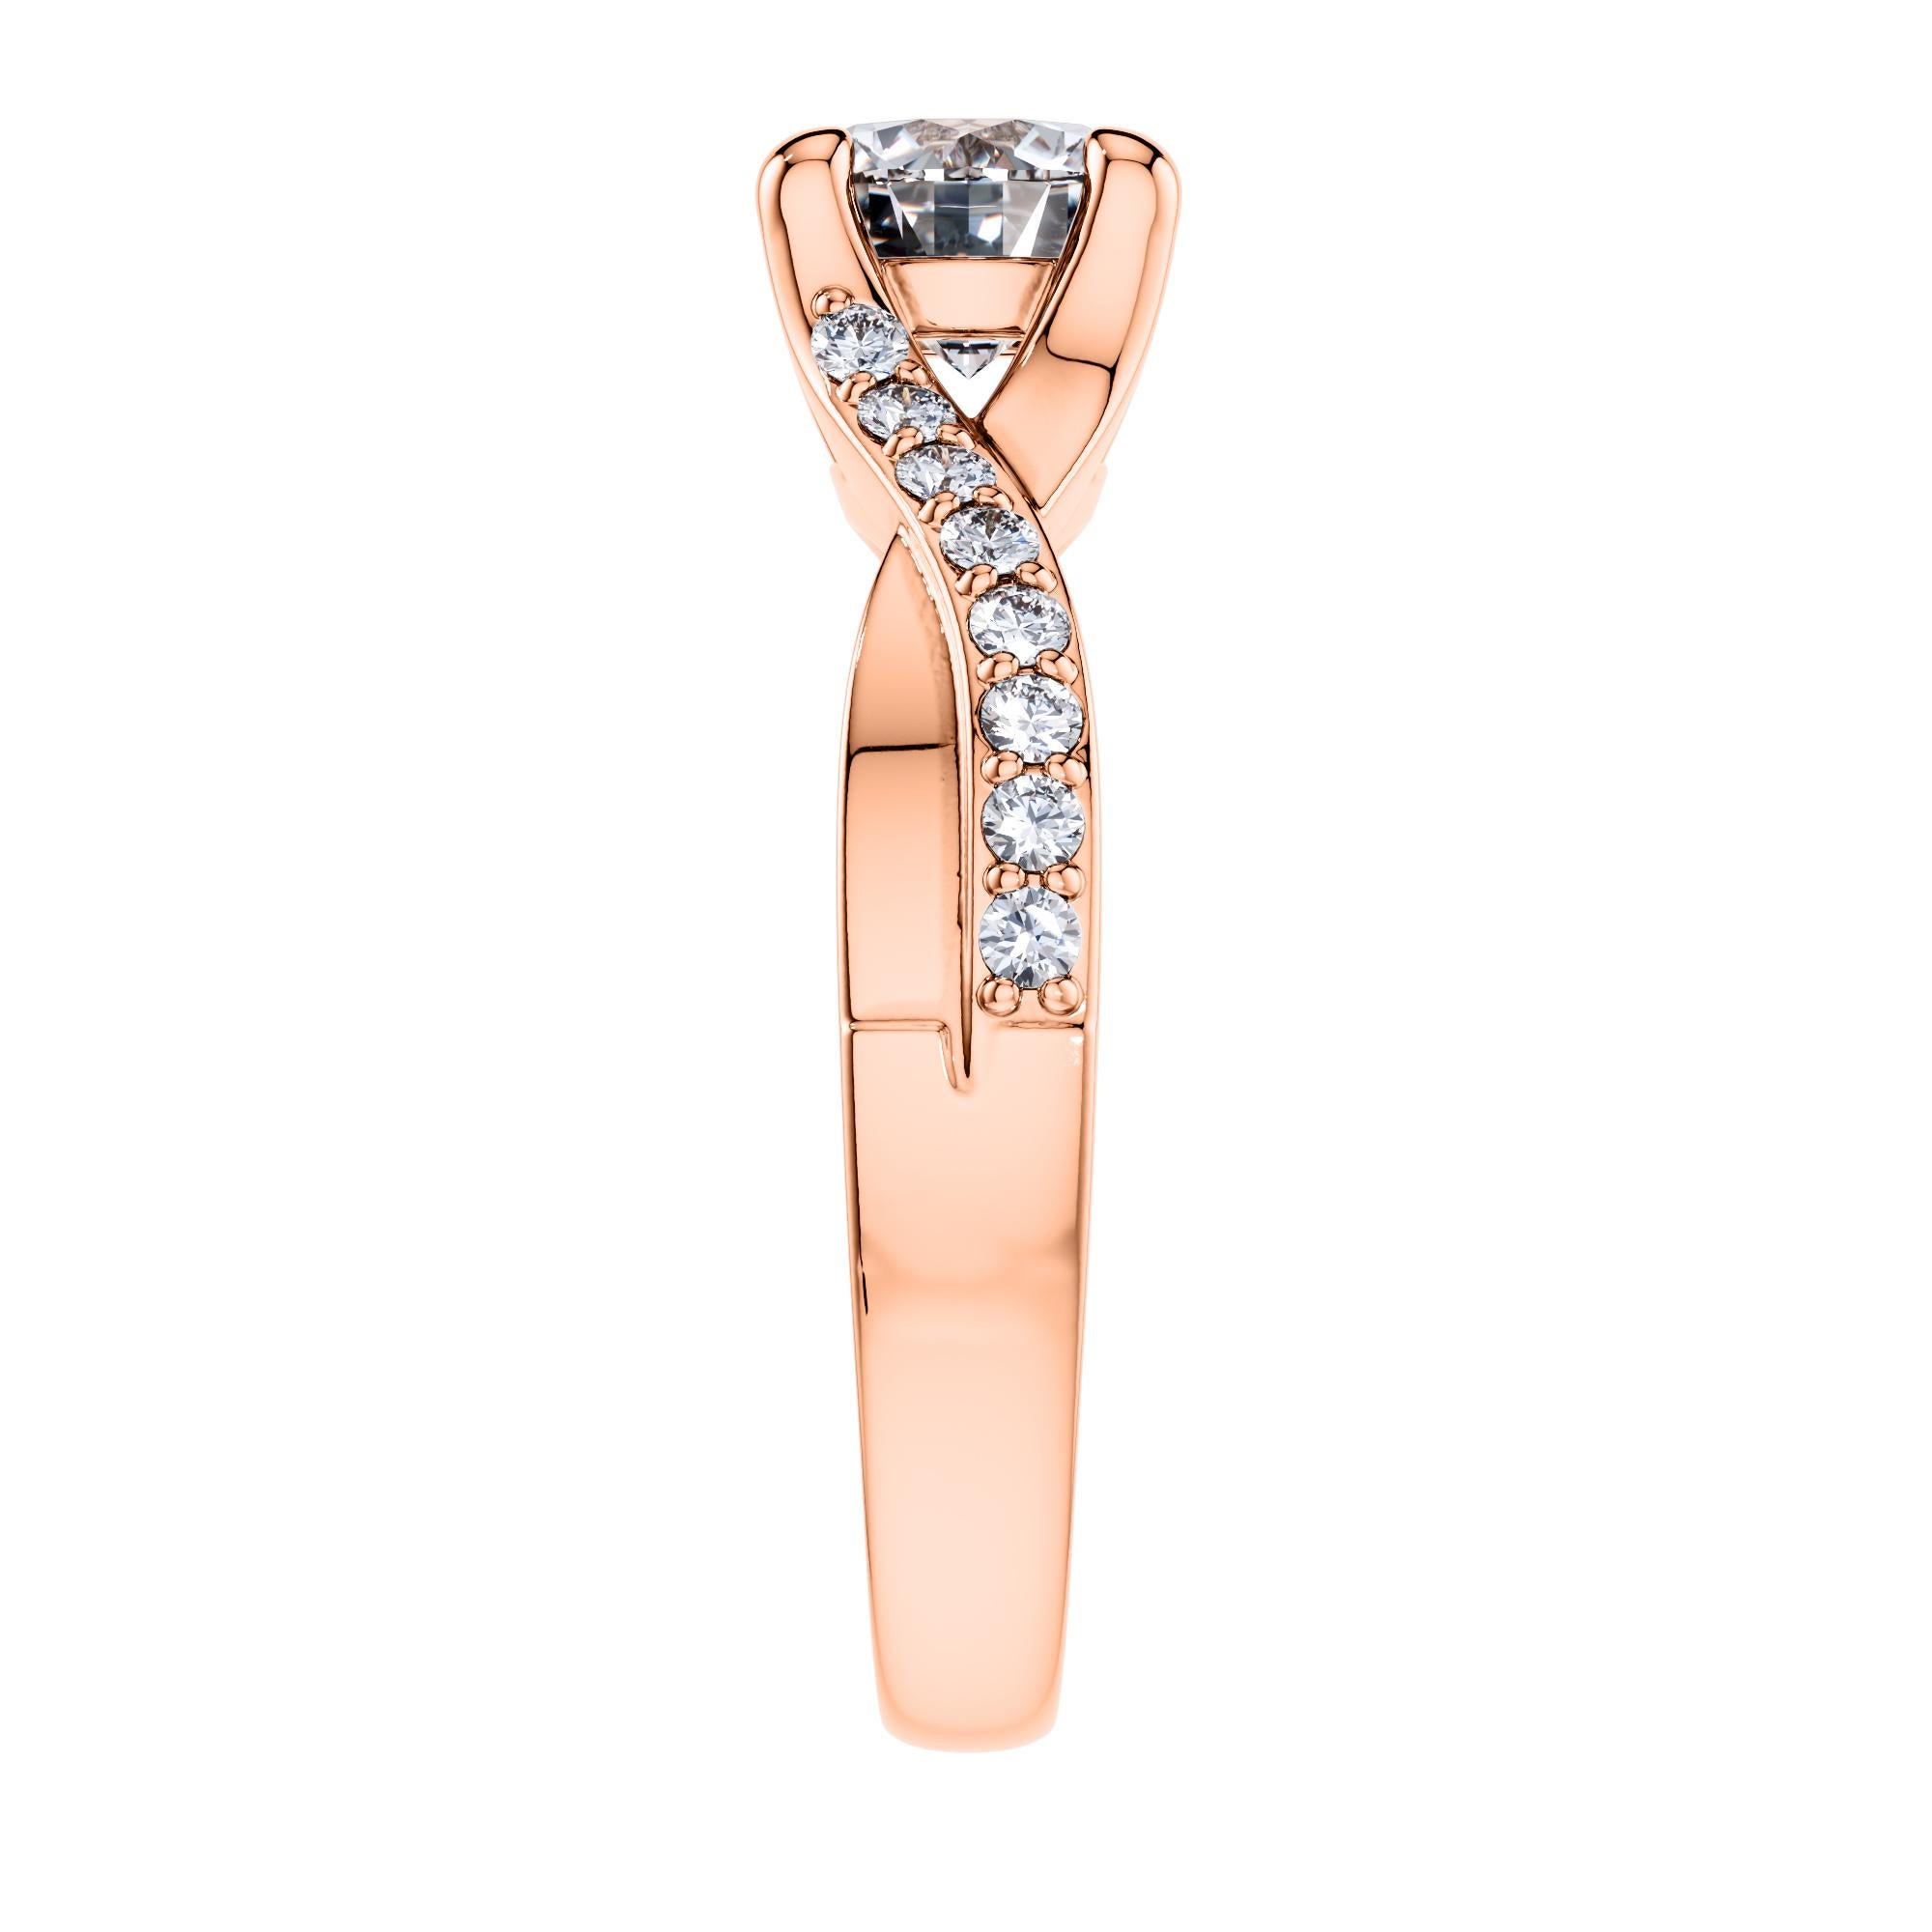 For a beautifully entwined journey together, this gleaming twisted vine modern classic engagement ring. Handmade in 18 Karat Rose Gold, with a total of 1.20 Carat White Diamond. Set in an open gallery 4 prong mount with a split shank that has one